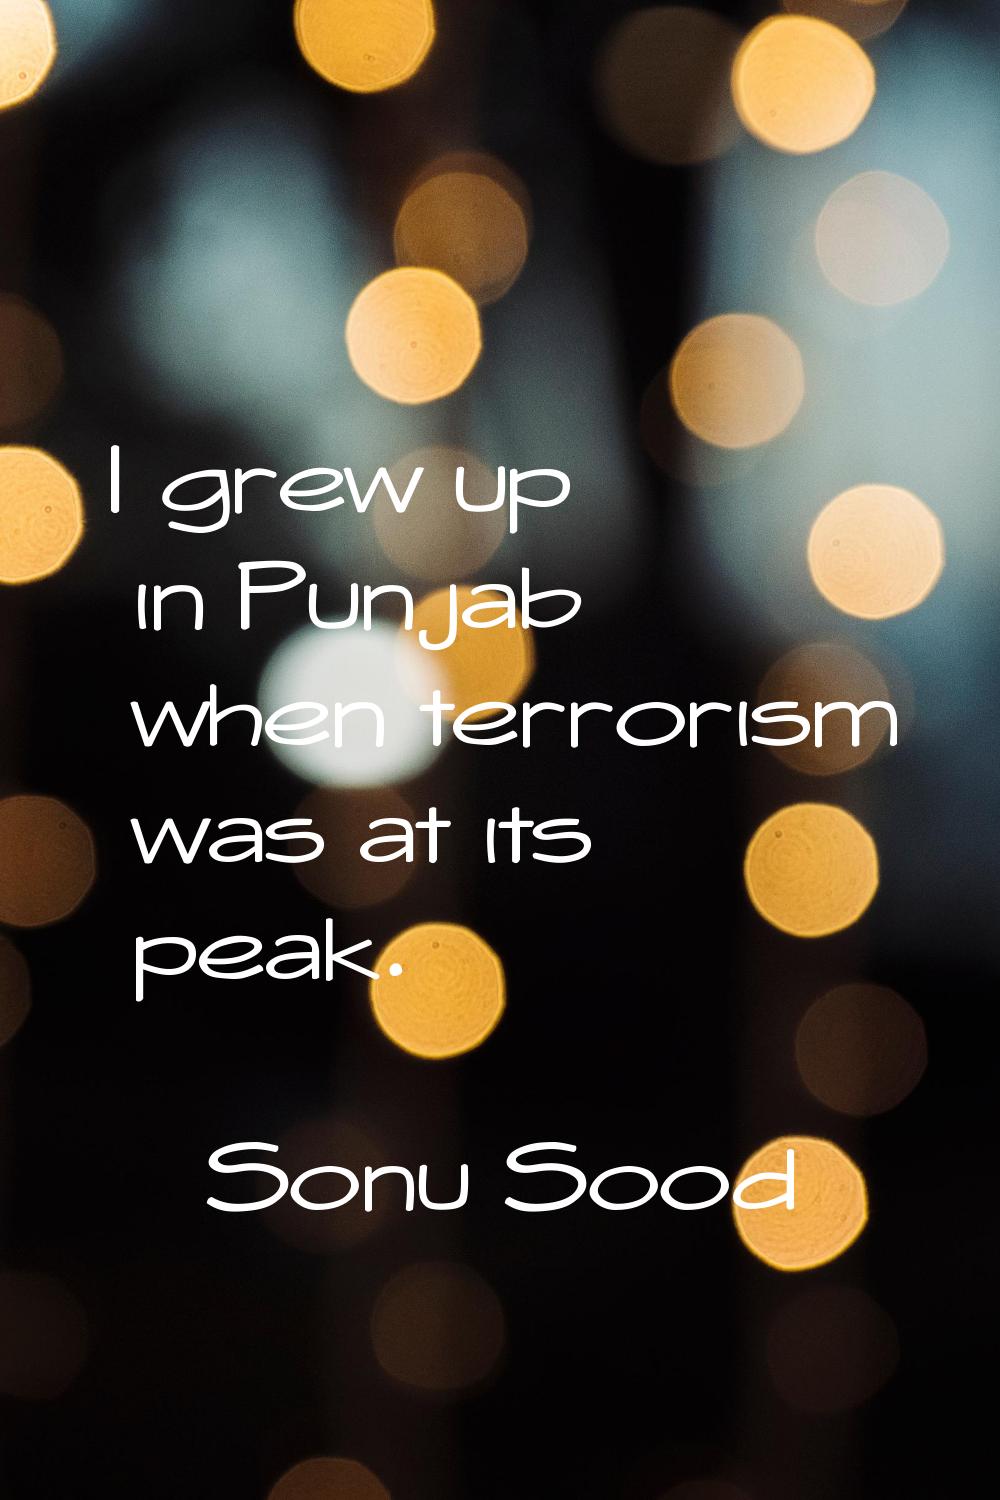 I grew up in Punjab when terrorism was at its peak.